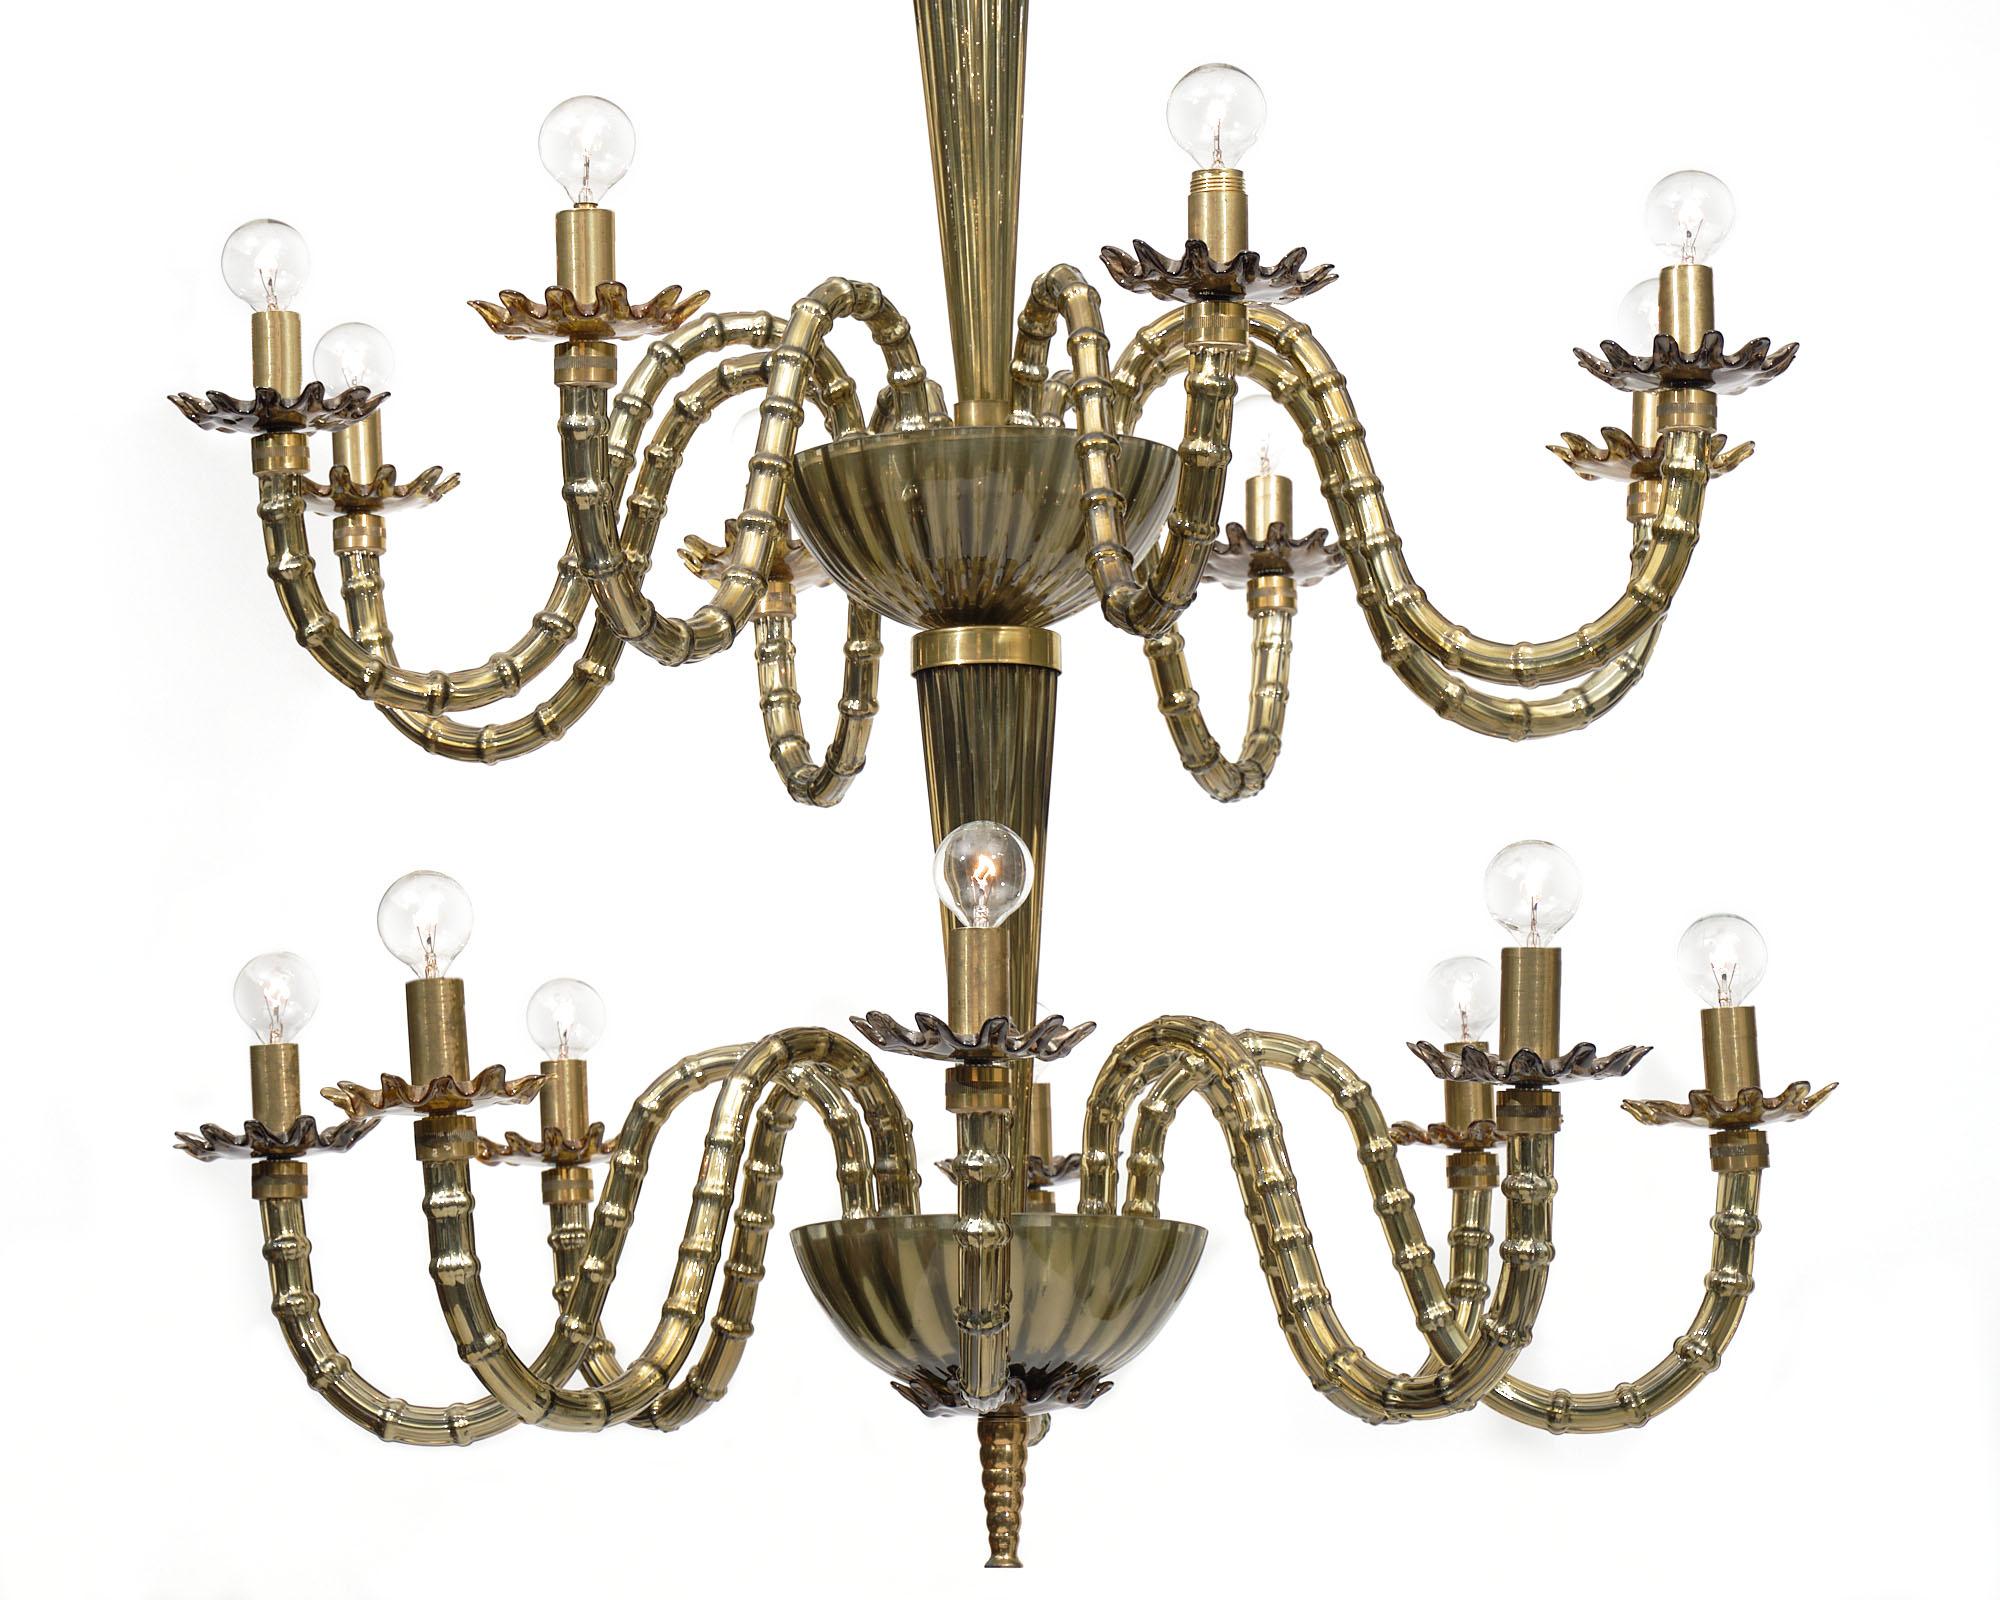 Italian chandelier from the from the Iconic Seguso factory on the island of Murano. The “Oro Specchiato” glass was mirrored and fused with gold leafing. This elegant and masterly crafted chandelier boasts 16 branches on two levels.